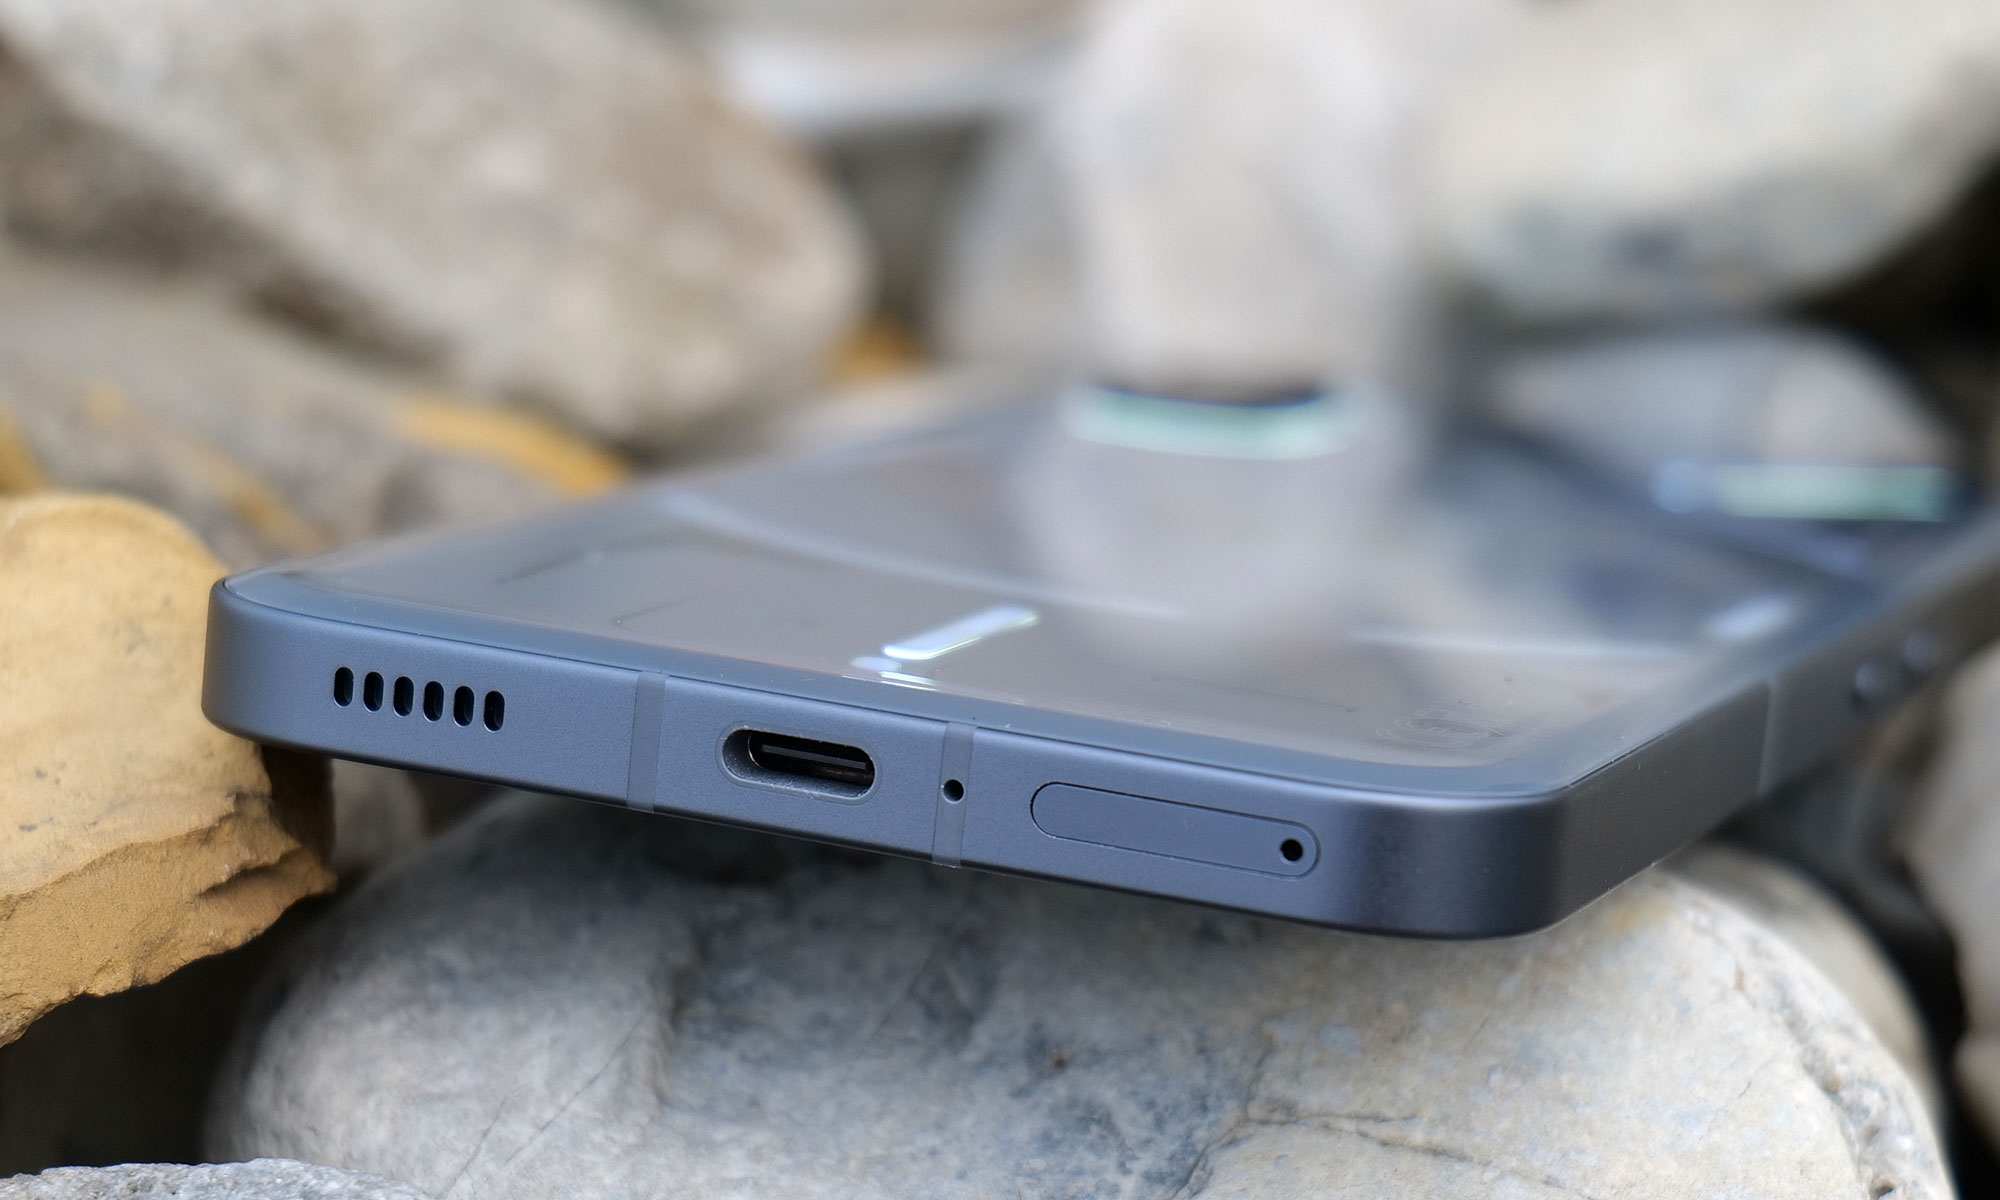 The bottom of the Phone 2 features a USB-C port for data and charging. Though you can also rely on wireless charging to add more juice as well. | DeviceDaily.com